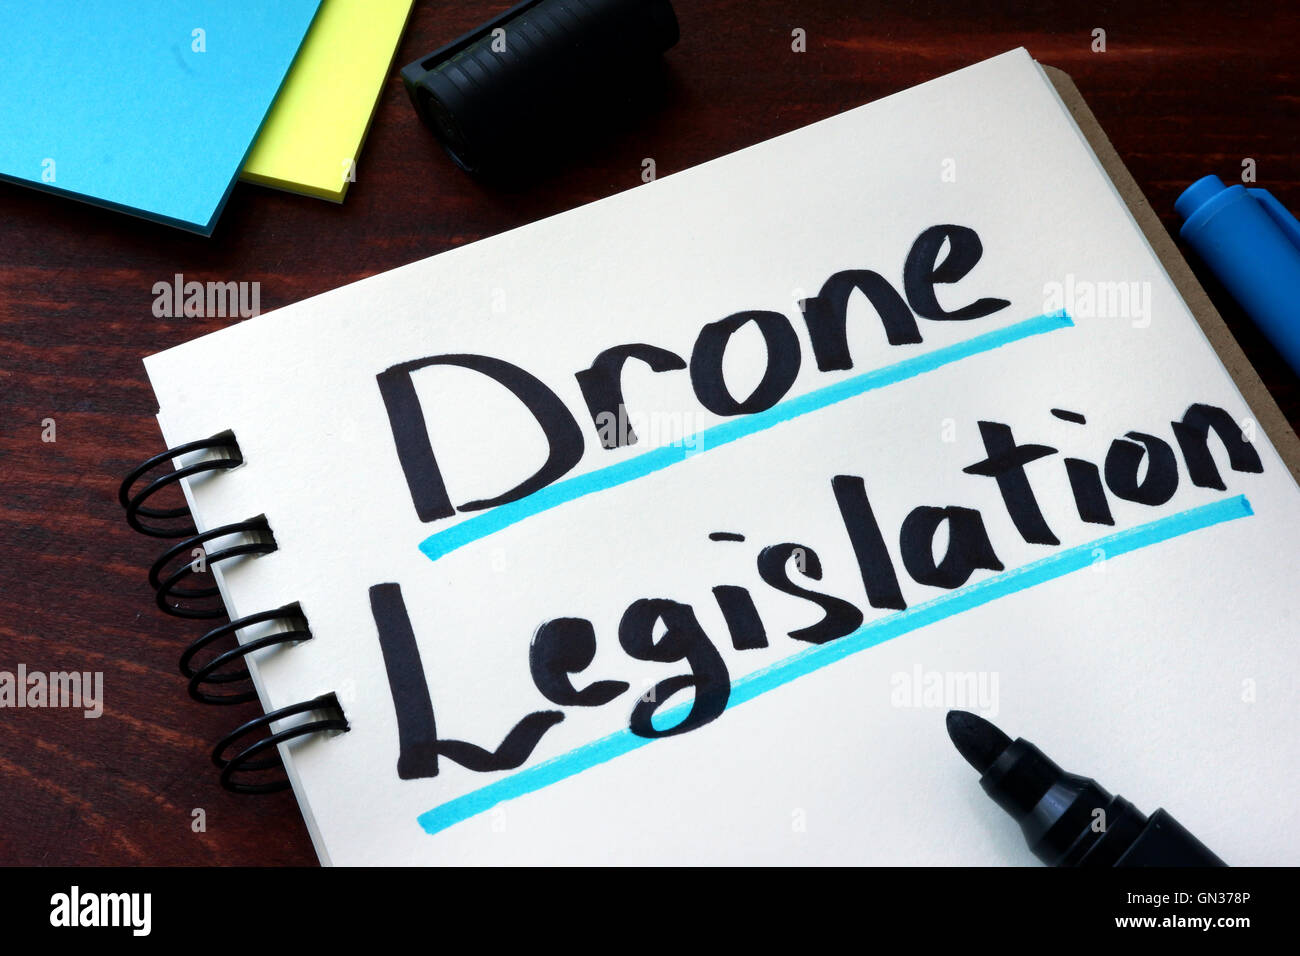 Drone Legislation written on a notepad with marker. Stock Photo